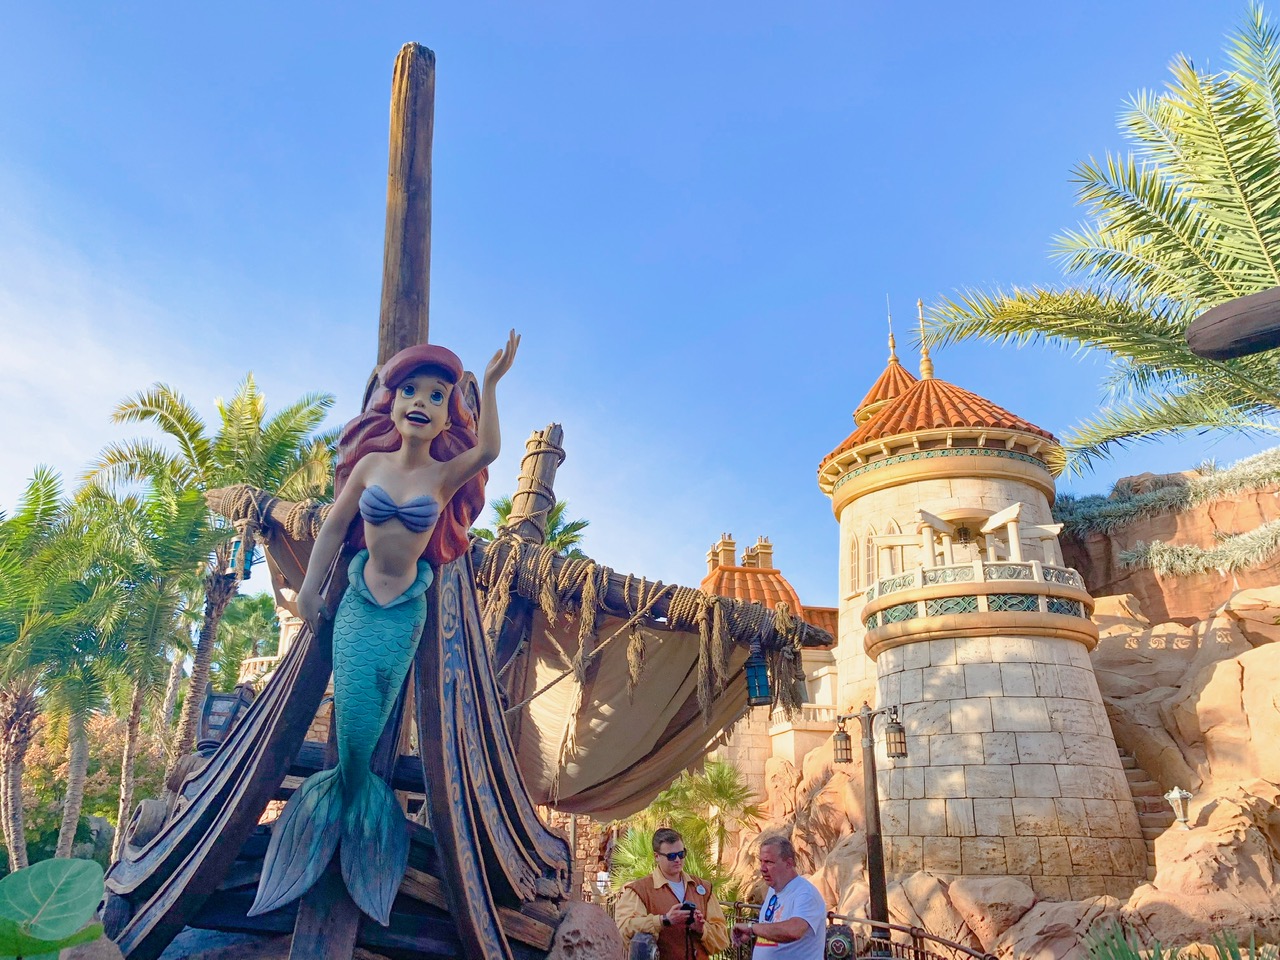 are figurine of Ariel outside the ride entrance to Journey of the Little Mermaid